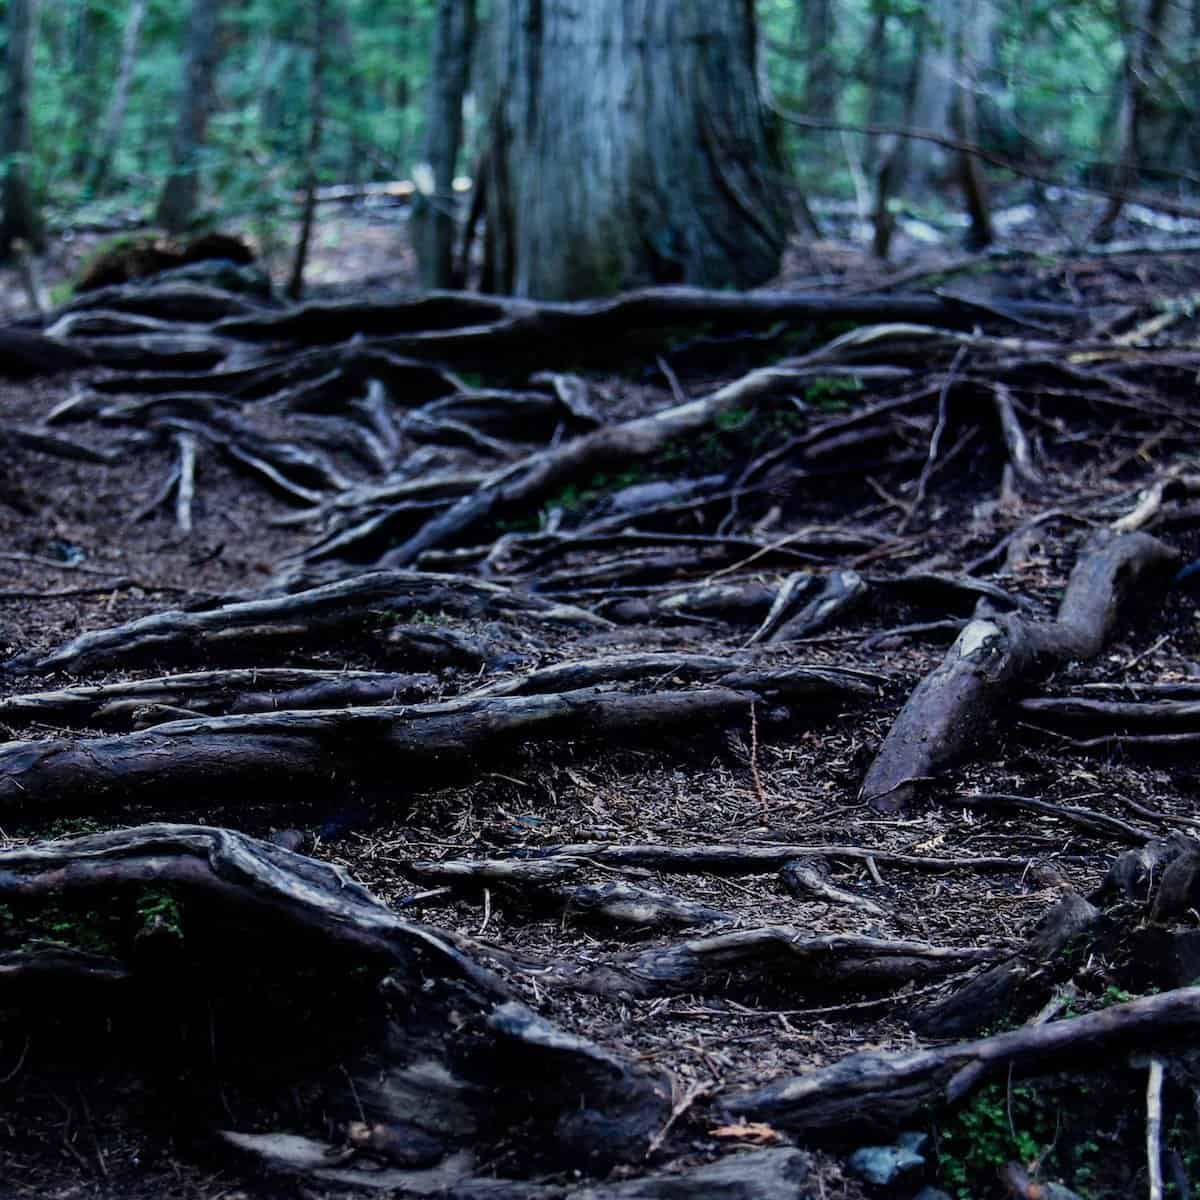 dark exposed tree roots on the ground with large cedar trees in the background